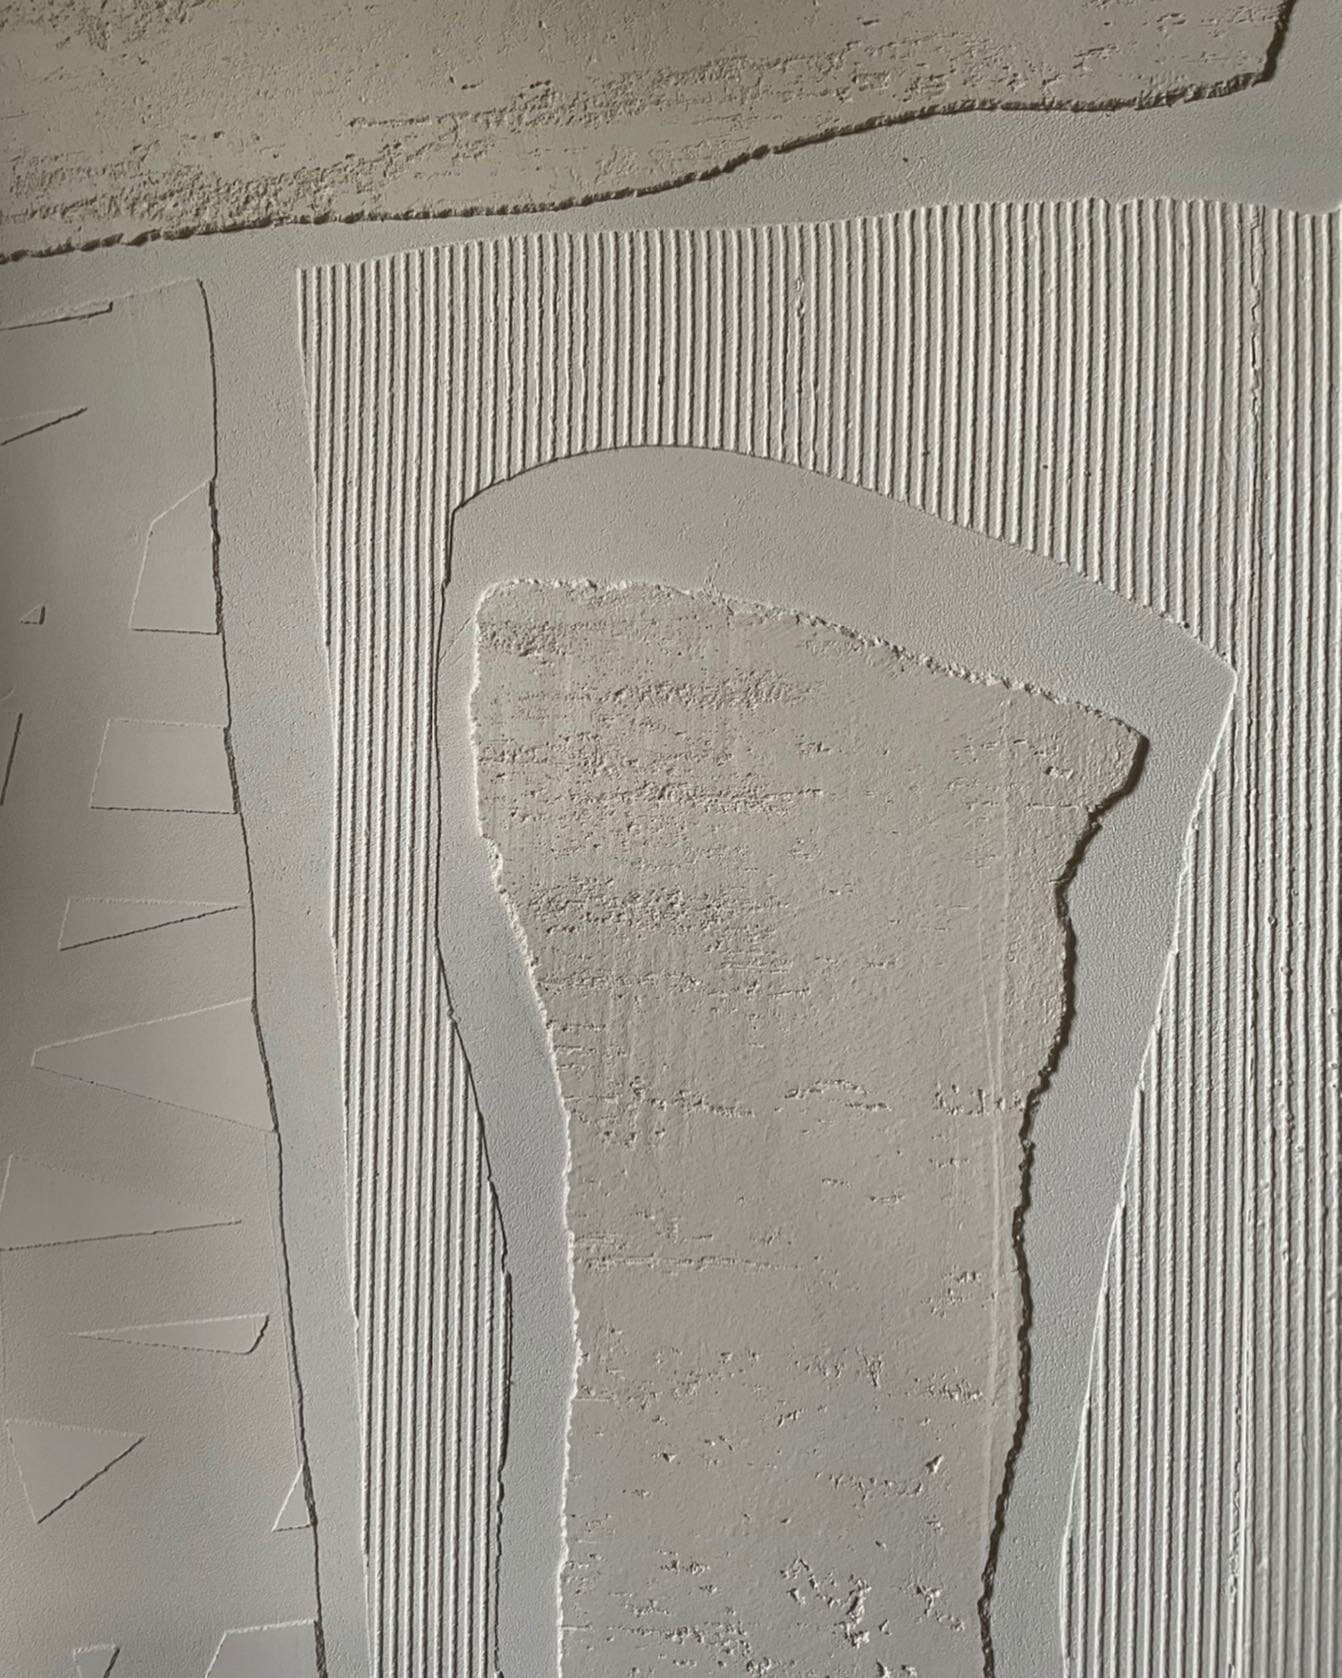 The Only Path No. 1 
Detail
48x60
Mixed fine plasters on solid birch cradle

#plaster #plasterart #plasterartist #art #artist #interiordesign #interiordesigner #painting #showroom #gallery #artinla #architect #wallfinishes #luxury #luxuryhome #wellbu